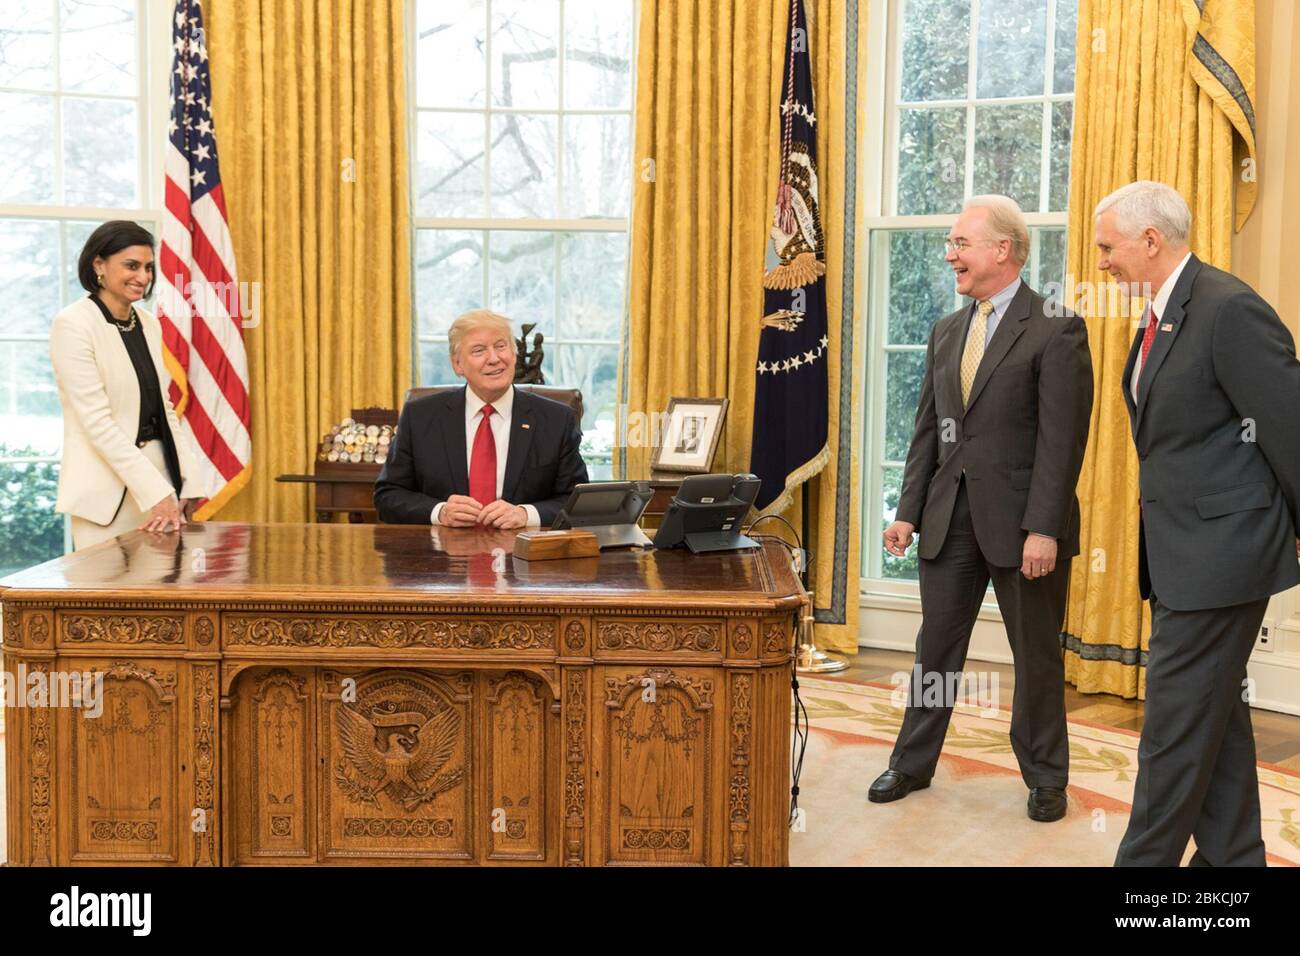 President Donald J. Trump shares a laugh with (clockwise from left) Ms.Seema Verma, Administrator of the Centers for Medicare and Medicaid Services, Secretary Tom Price, U.S. Secretary of Health and Human Services, and Vice President Mike Pence on Tuesday, March 14, 2017, in the Oval Office of the White House. Ms. Verma was sworn in as the Administrator earlier in the afternoon by Vice President Pence. Photo of the Day: 3/15/17 Stock Photo